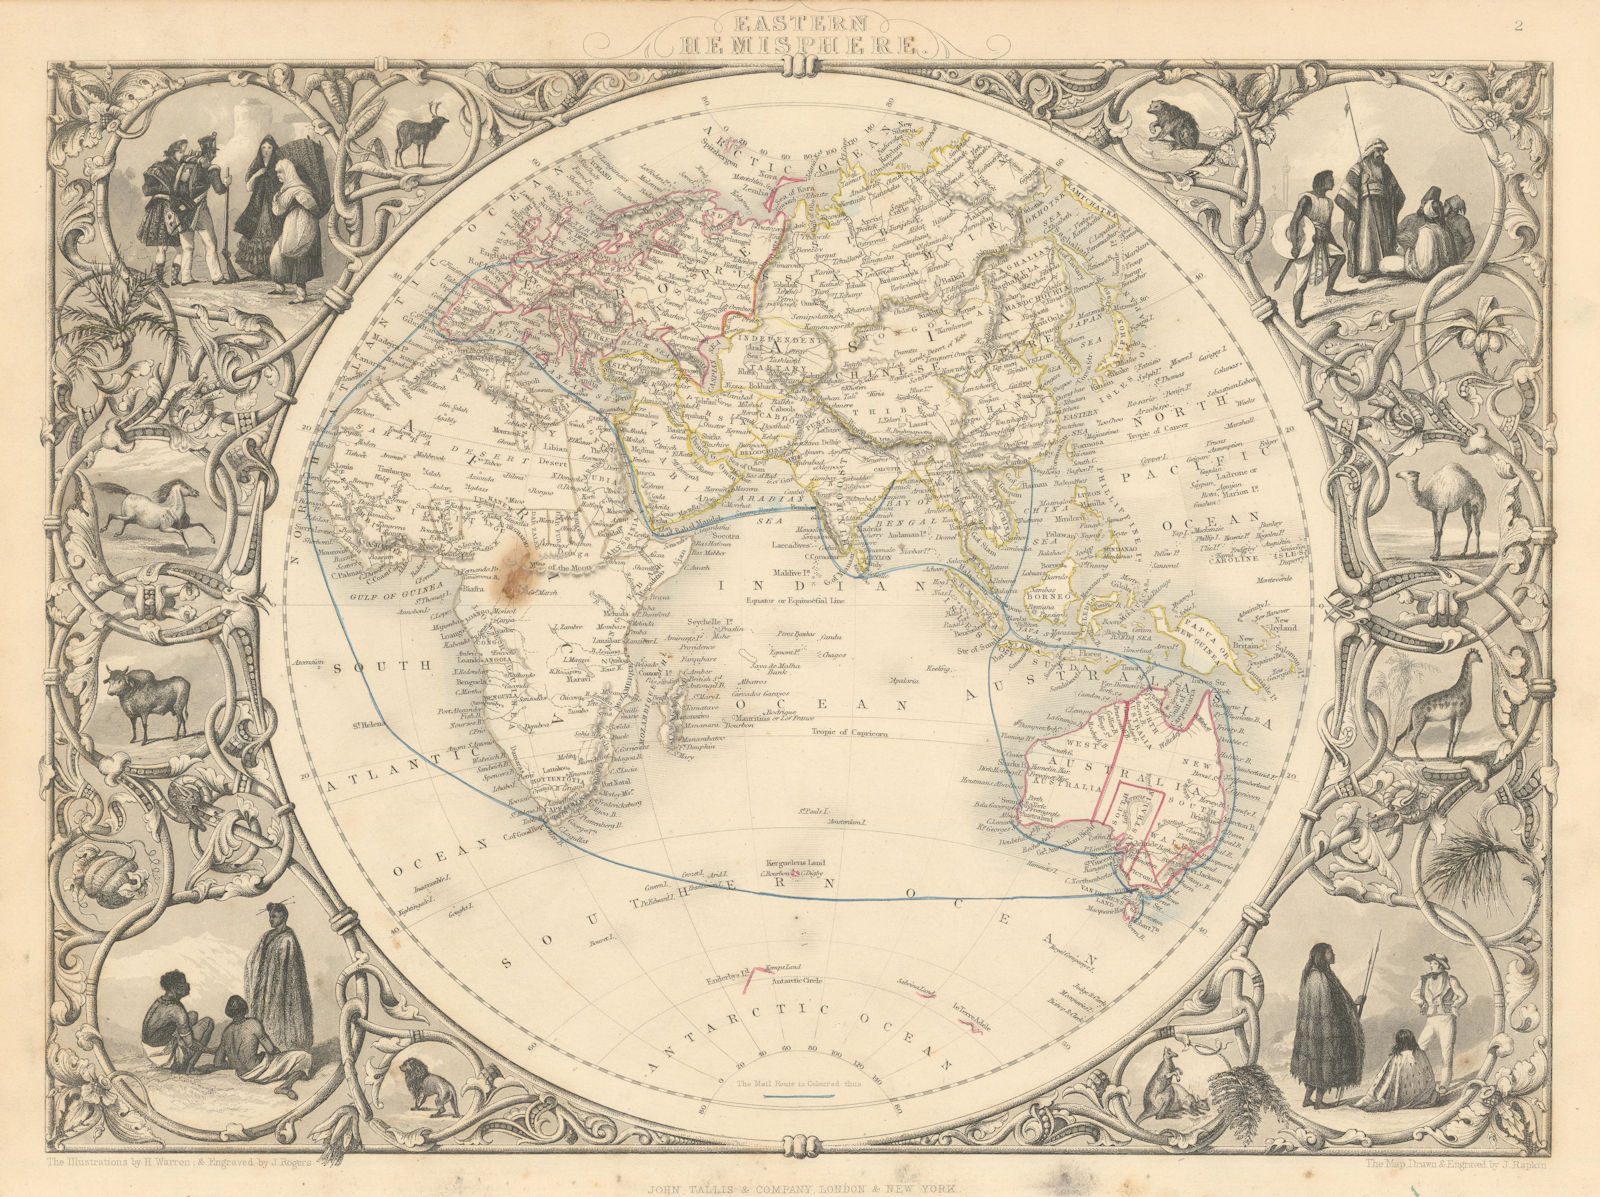 EASTERN HEMISPHERE.Shows mail routes to British colonies. RAPKIN/TALLIS 1851 map